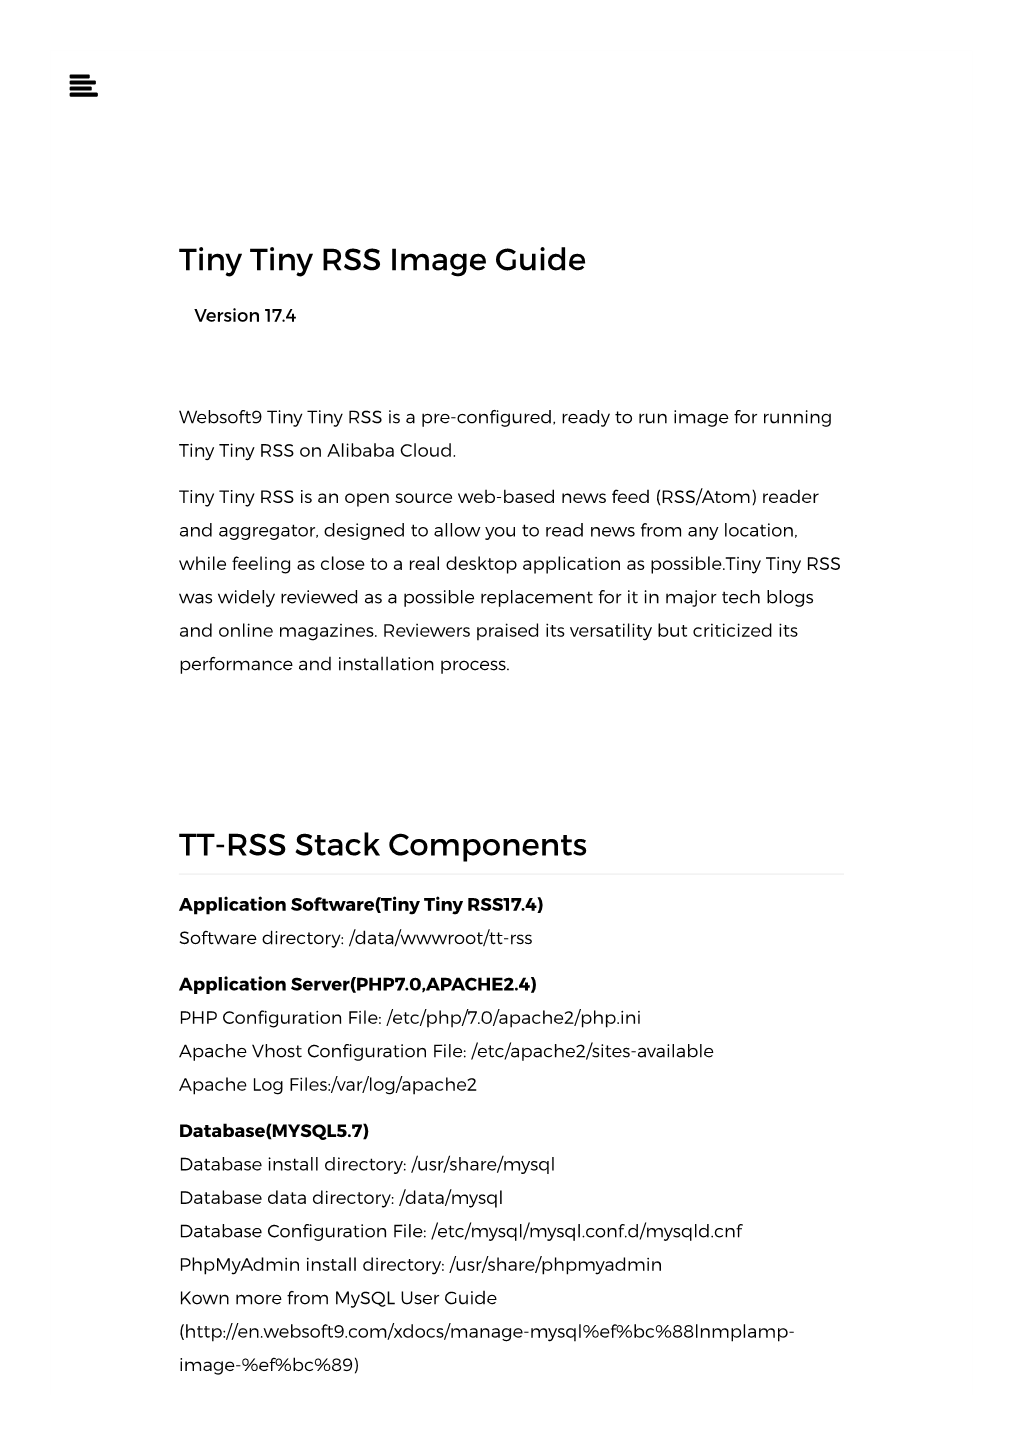 Tiny Tiny RSS Image Guide TT-RSS Stack Components